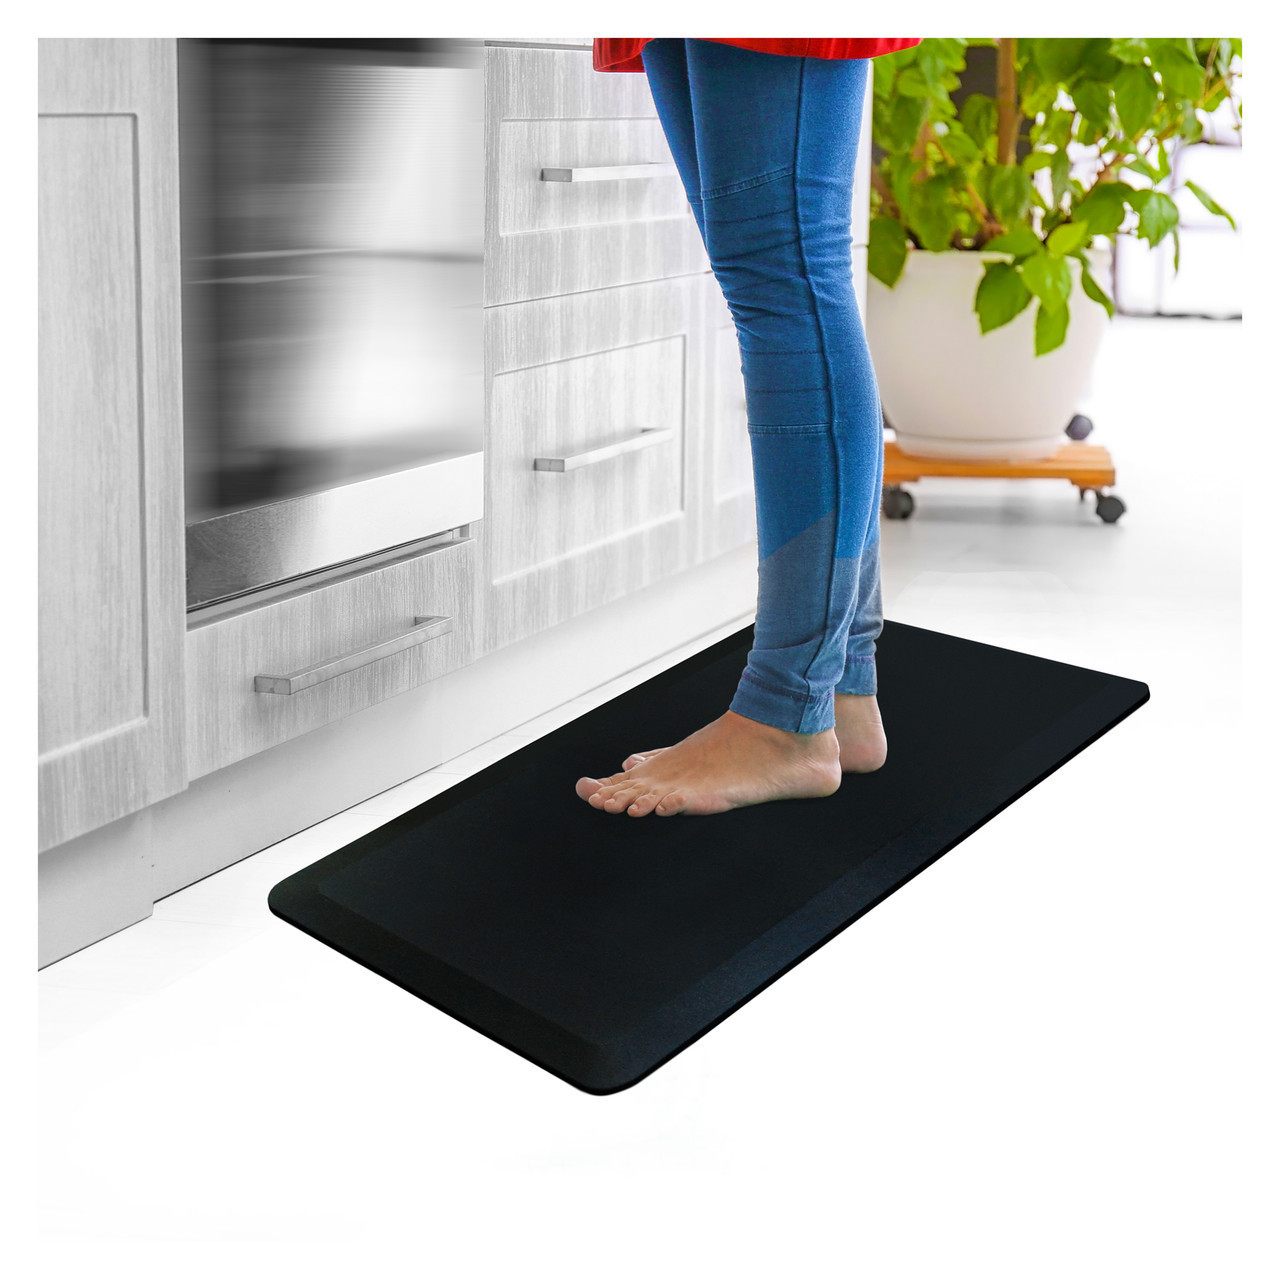 https://cdn11.bigcommerce.com/s-fjwps1jbkv/images/stencil/1280x1280/products/328/3798/ultralux-premium-anti-fatigue-floor-comfort-mat-or-durable-ergonomic-multi-purpose-non-slip-standing-support-pad-or-34-thick-or-black__81130.1688995007.jpg?c=2?imbypass=on